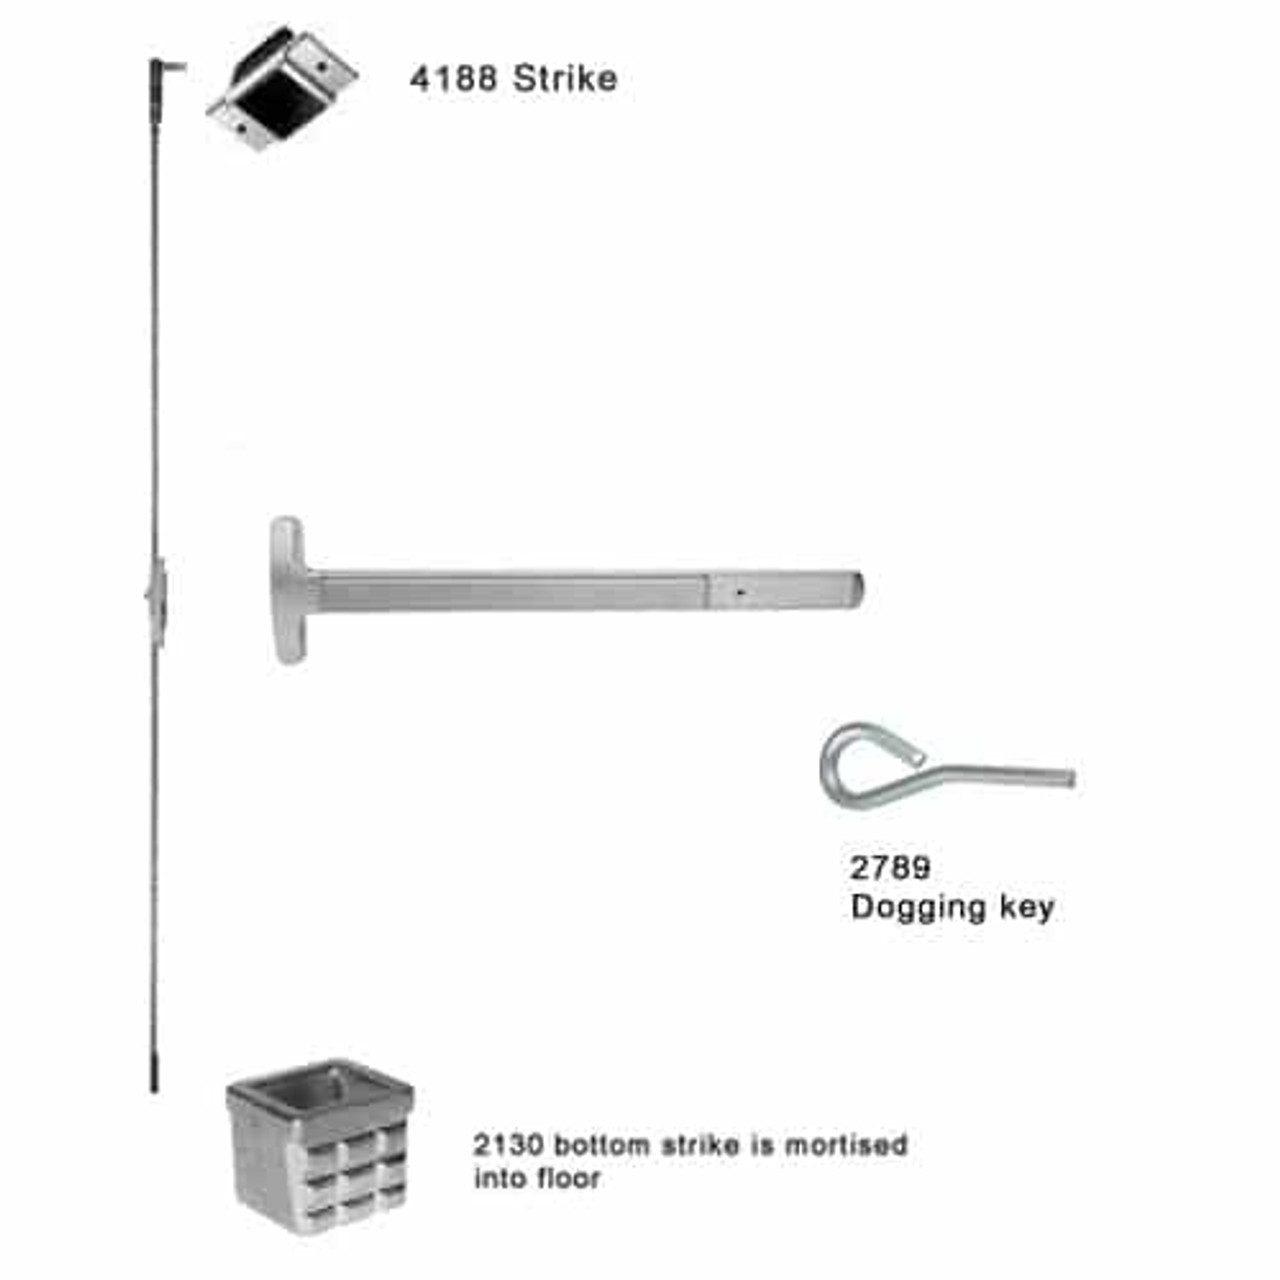 24-C-NL-US32-3-RHR Falcon 24 Series Concealed Vertical Rod Device with 718NL Delta Night Latch Trim in Polished Stainless Steel